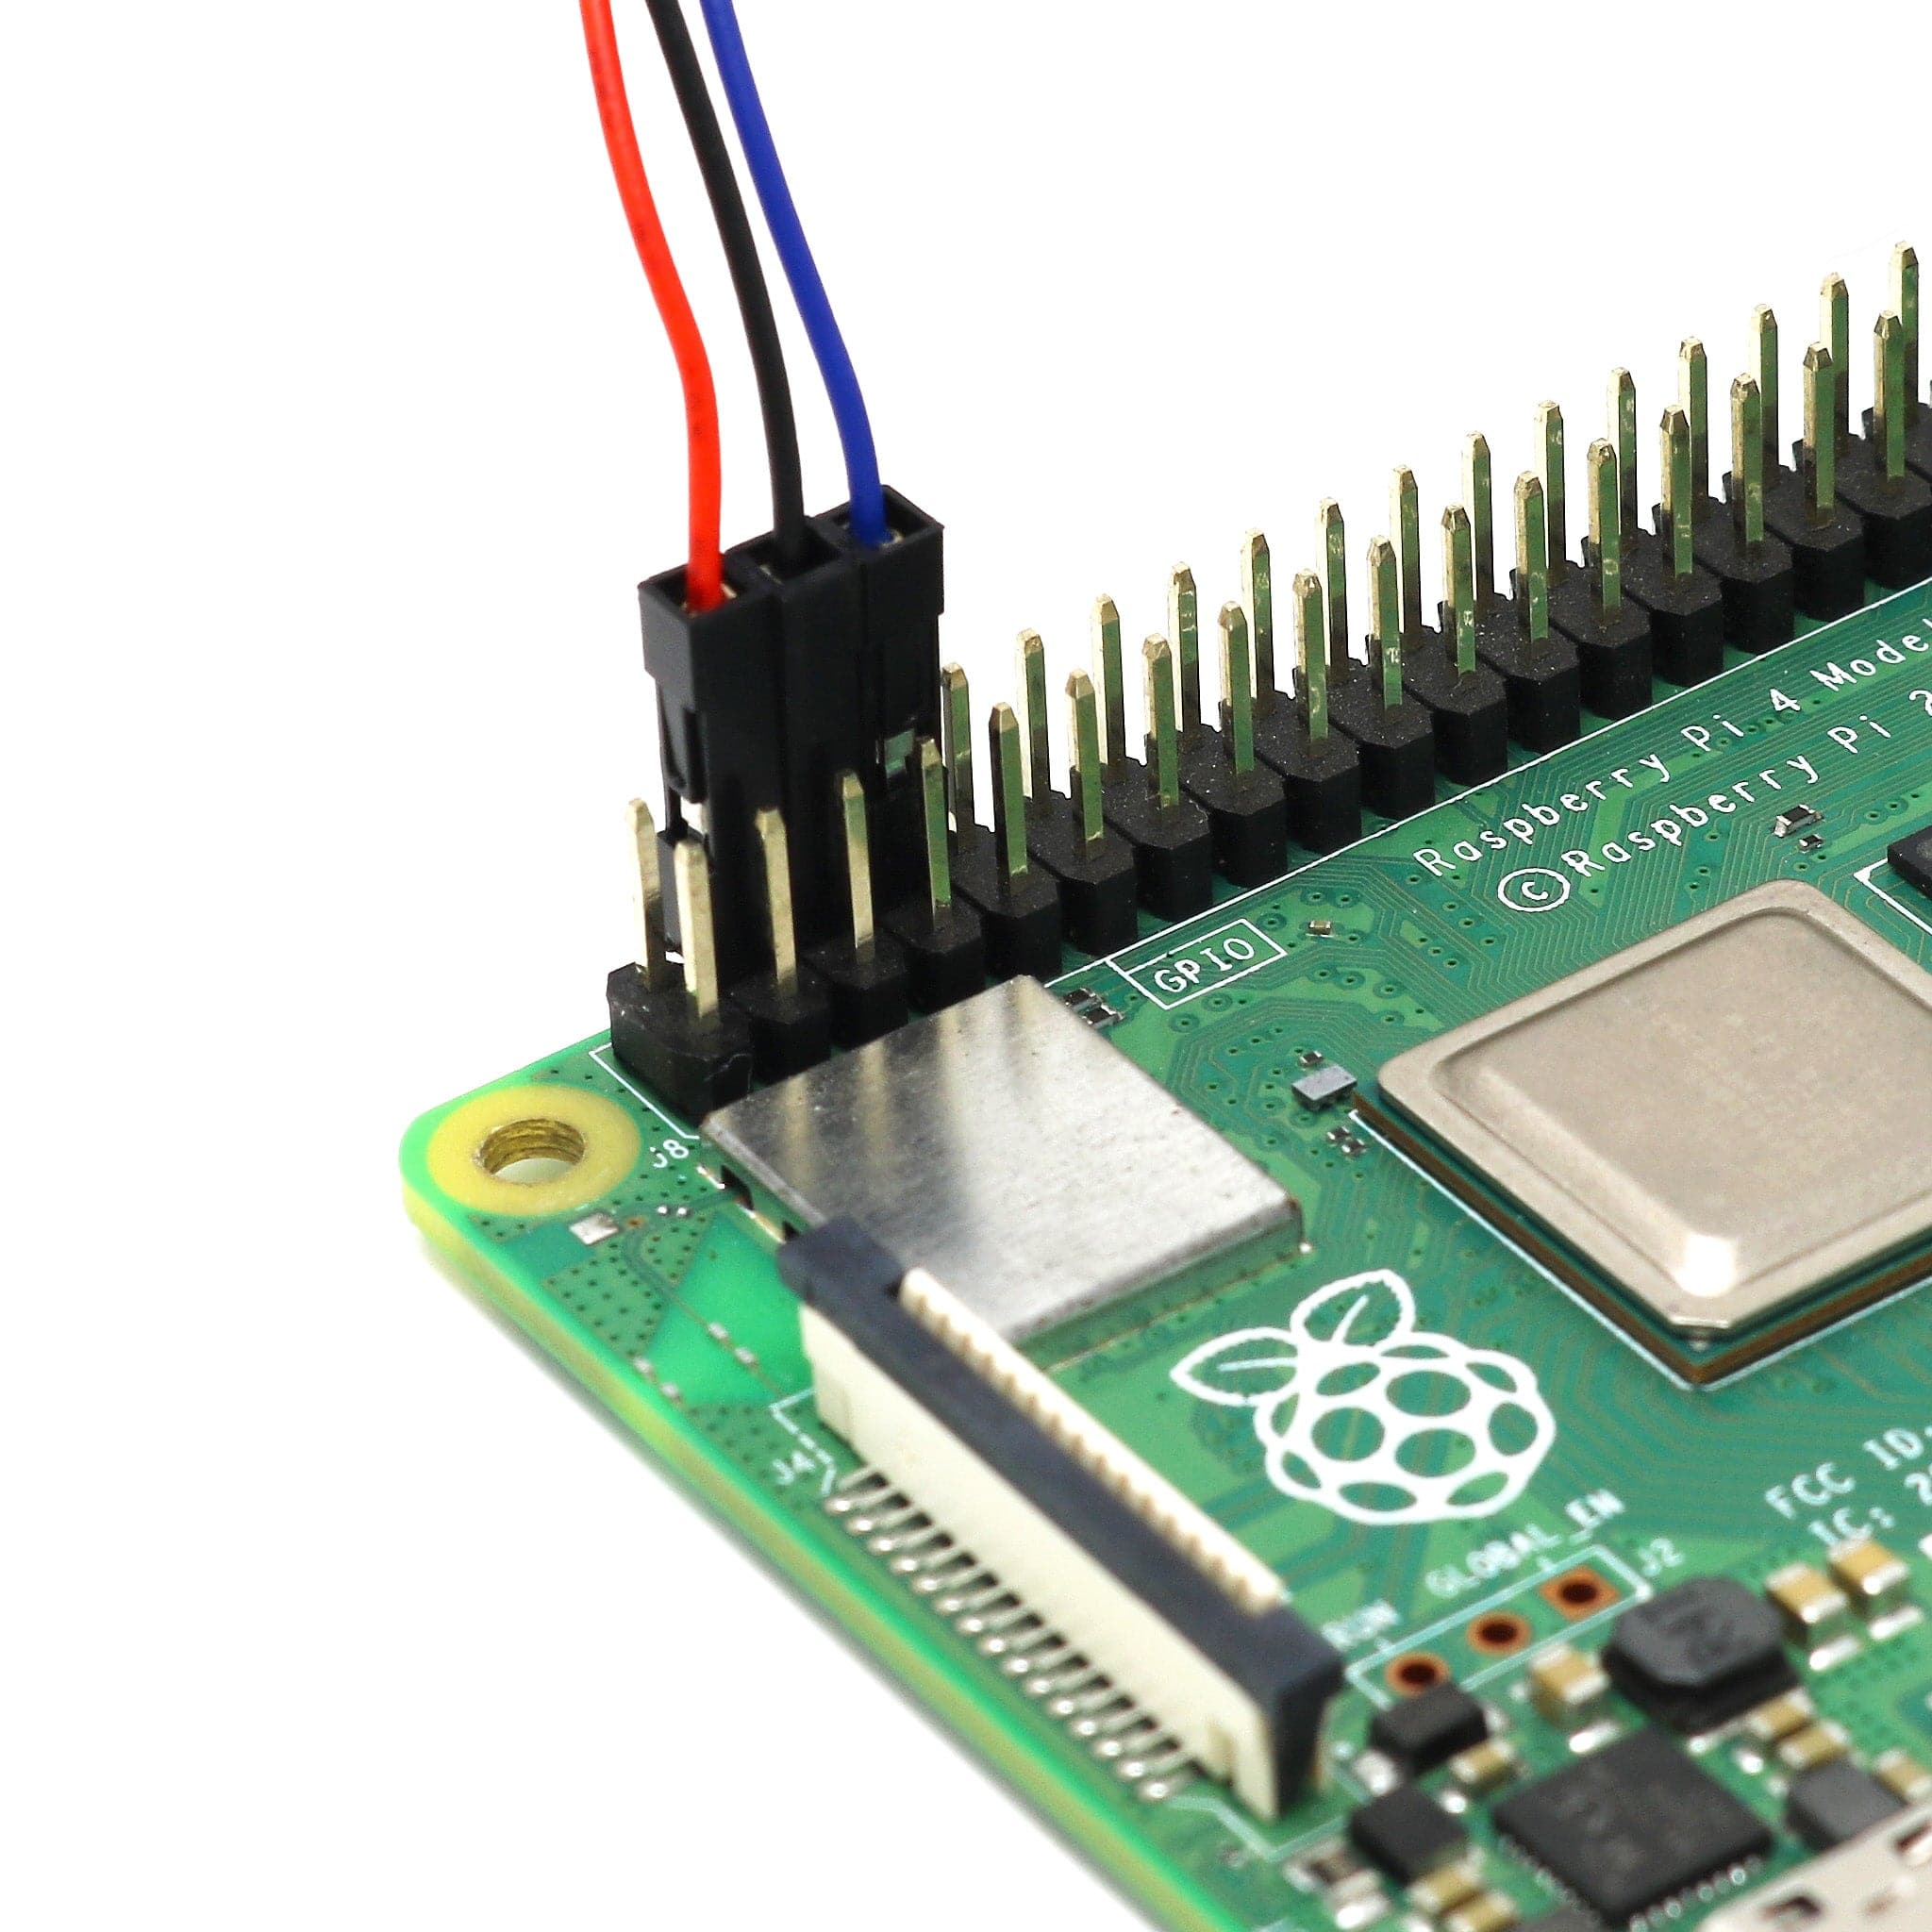 Software-Controllable 5V 30mm Fan for Raspberry Pi - The Pi Hut